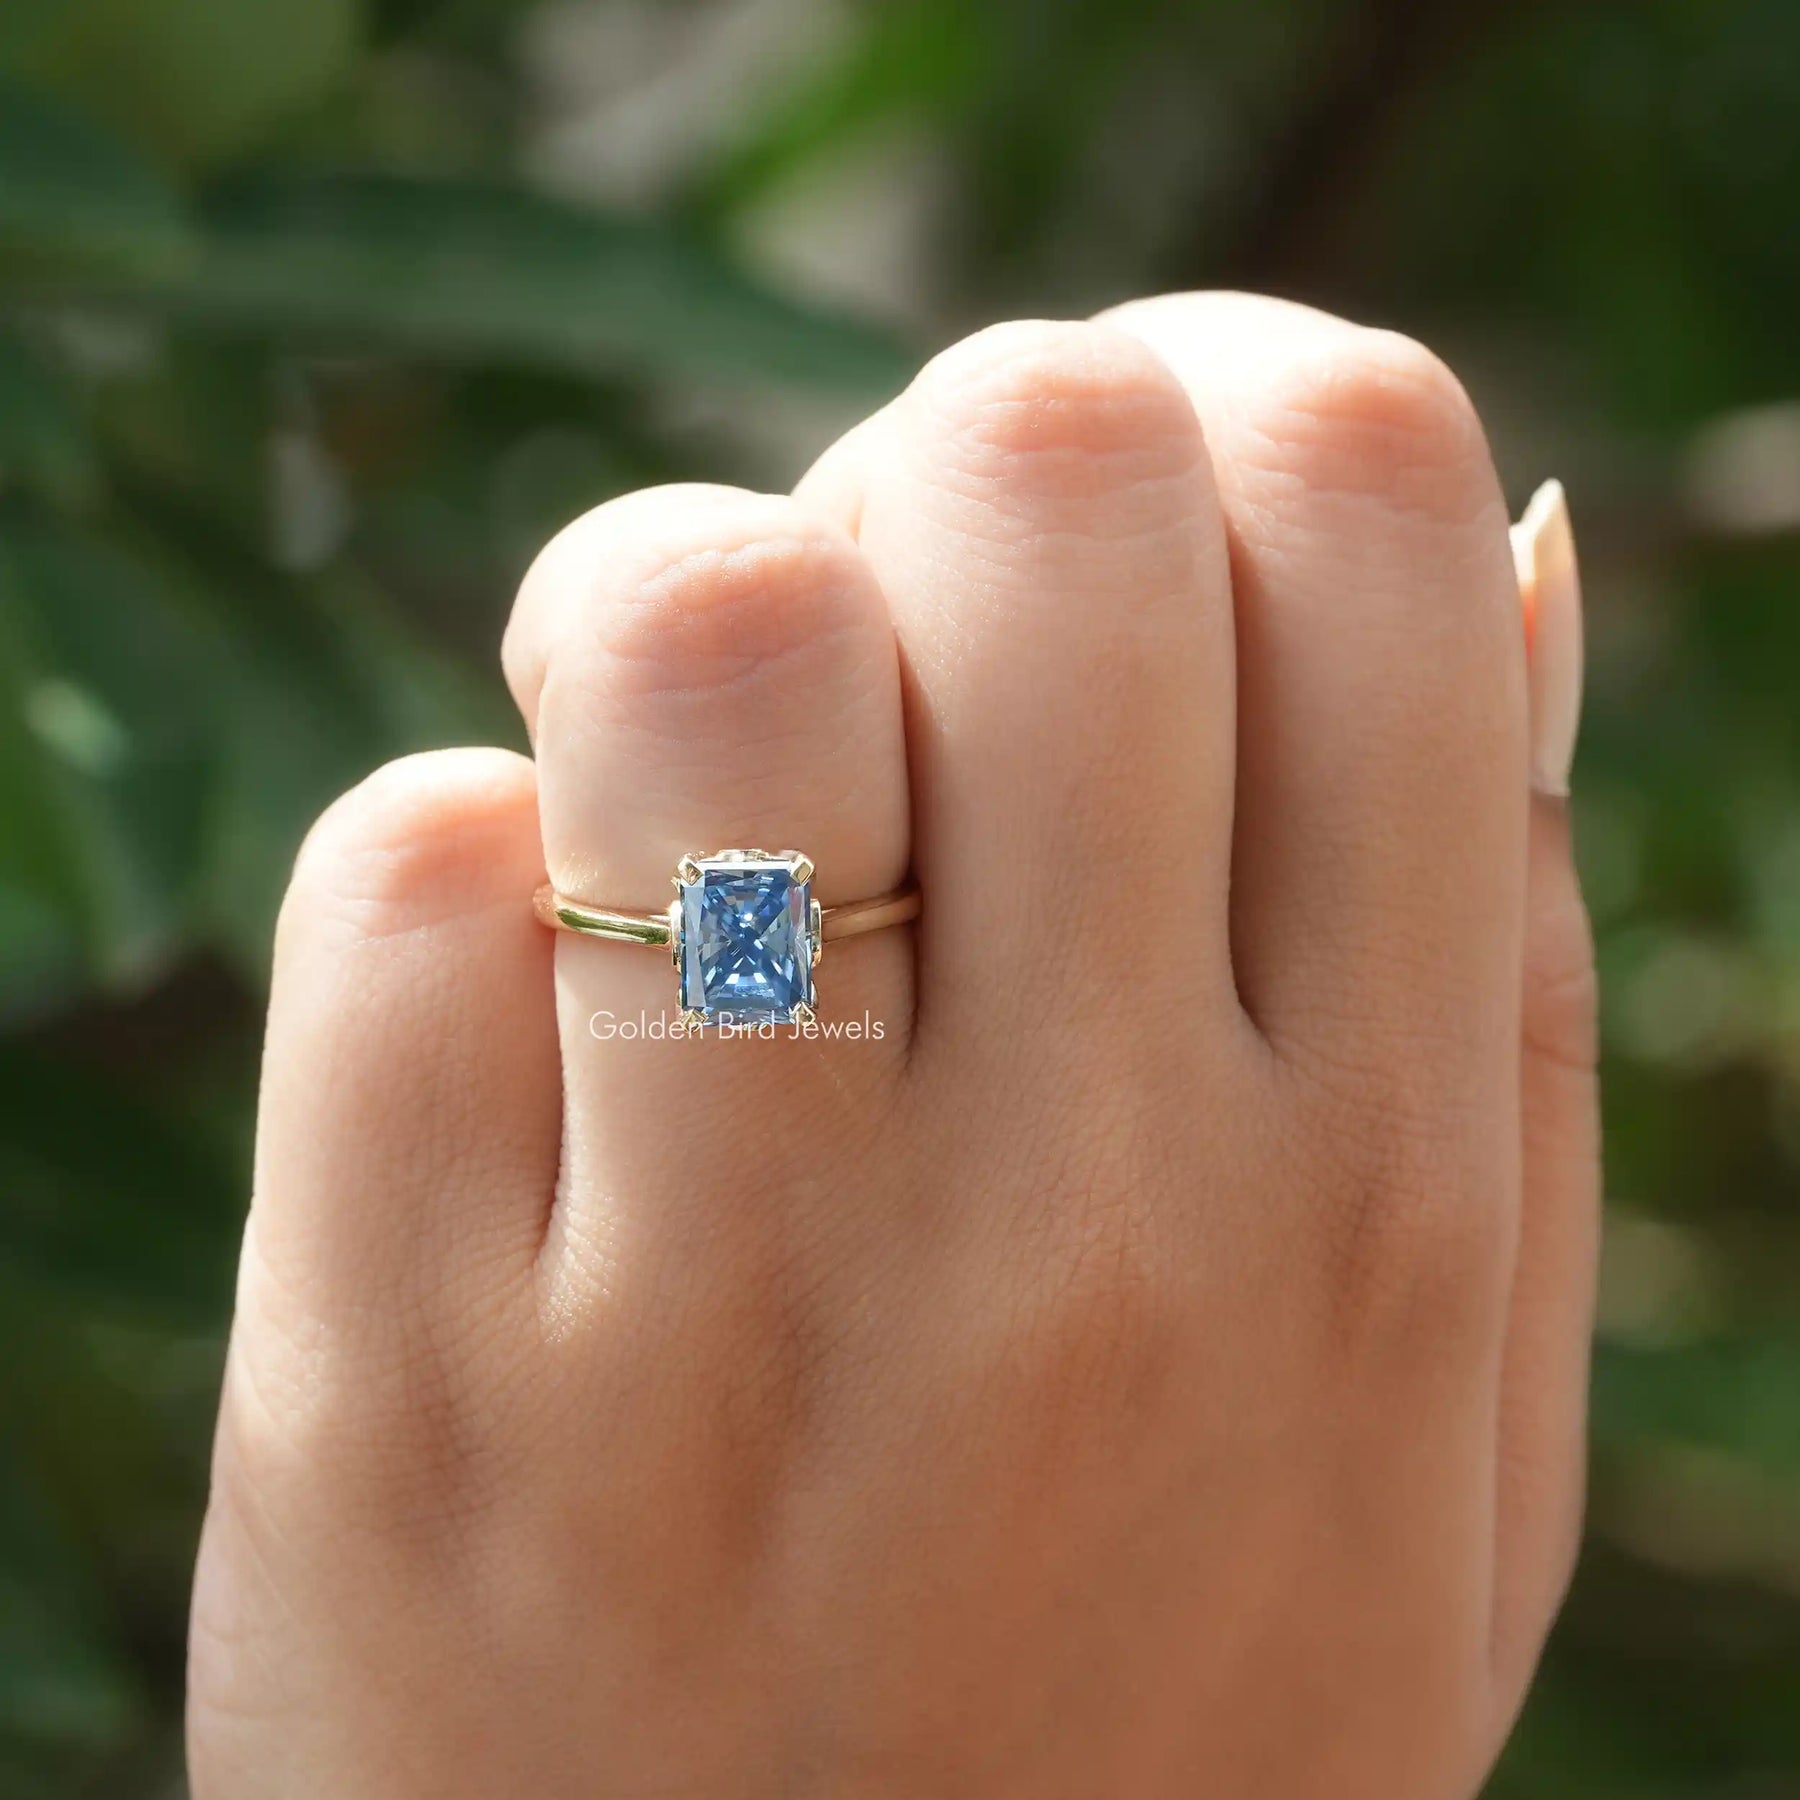 [In Finger front View Of Radiant Moissanite Solitaire Engagement Ring]-[Golden Bird Jewels]